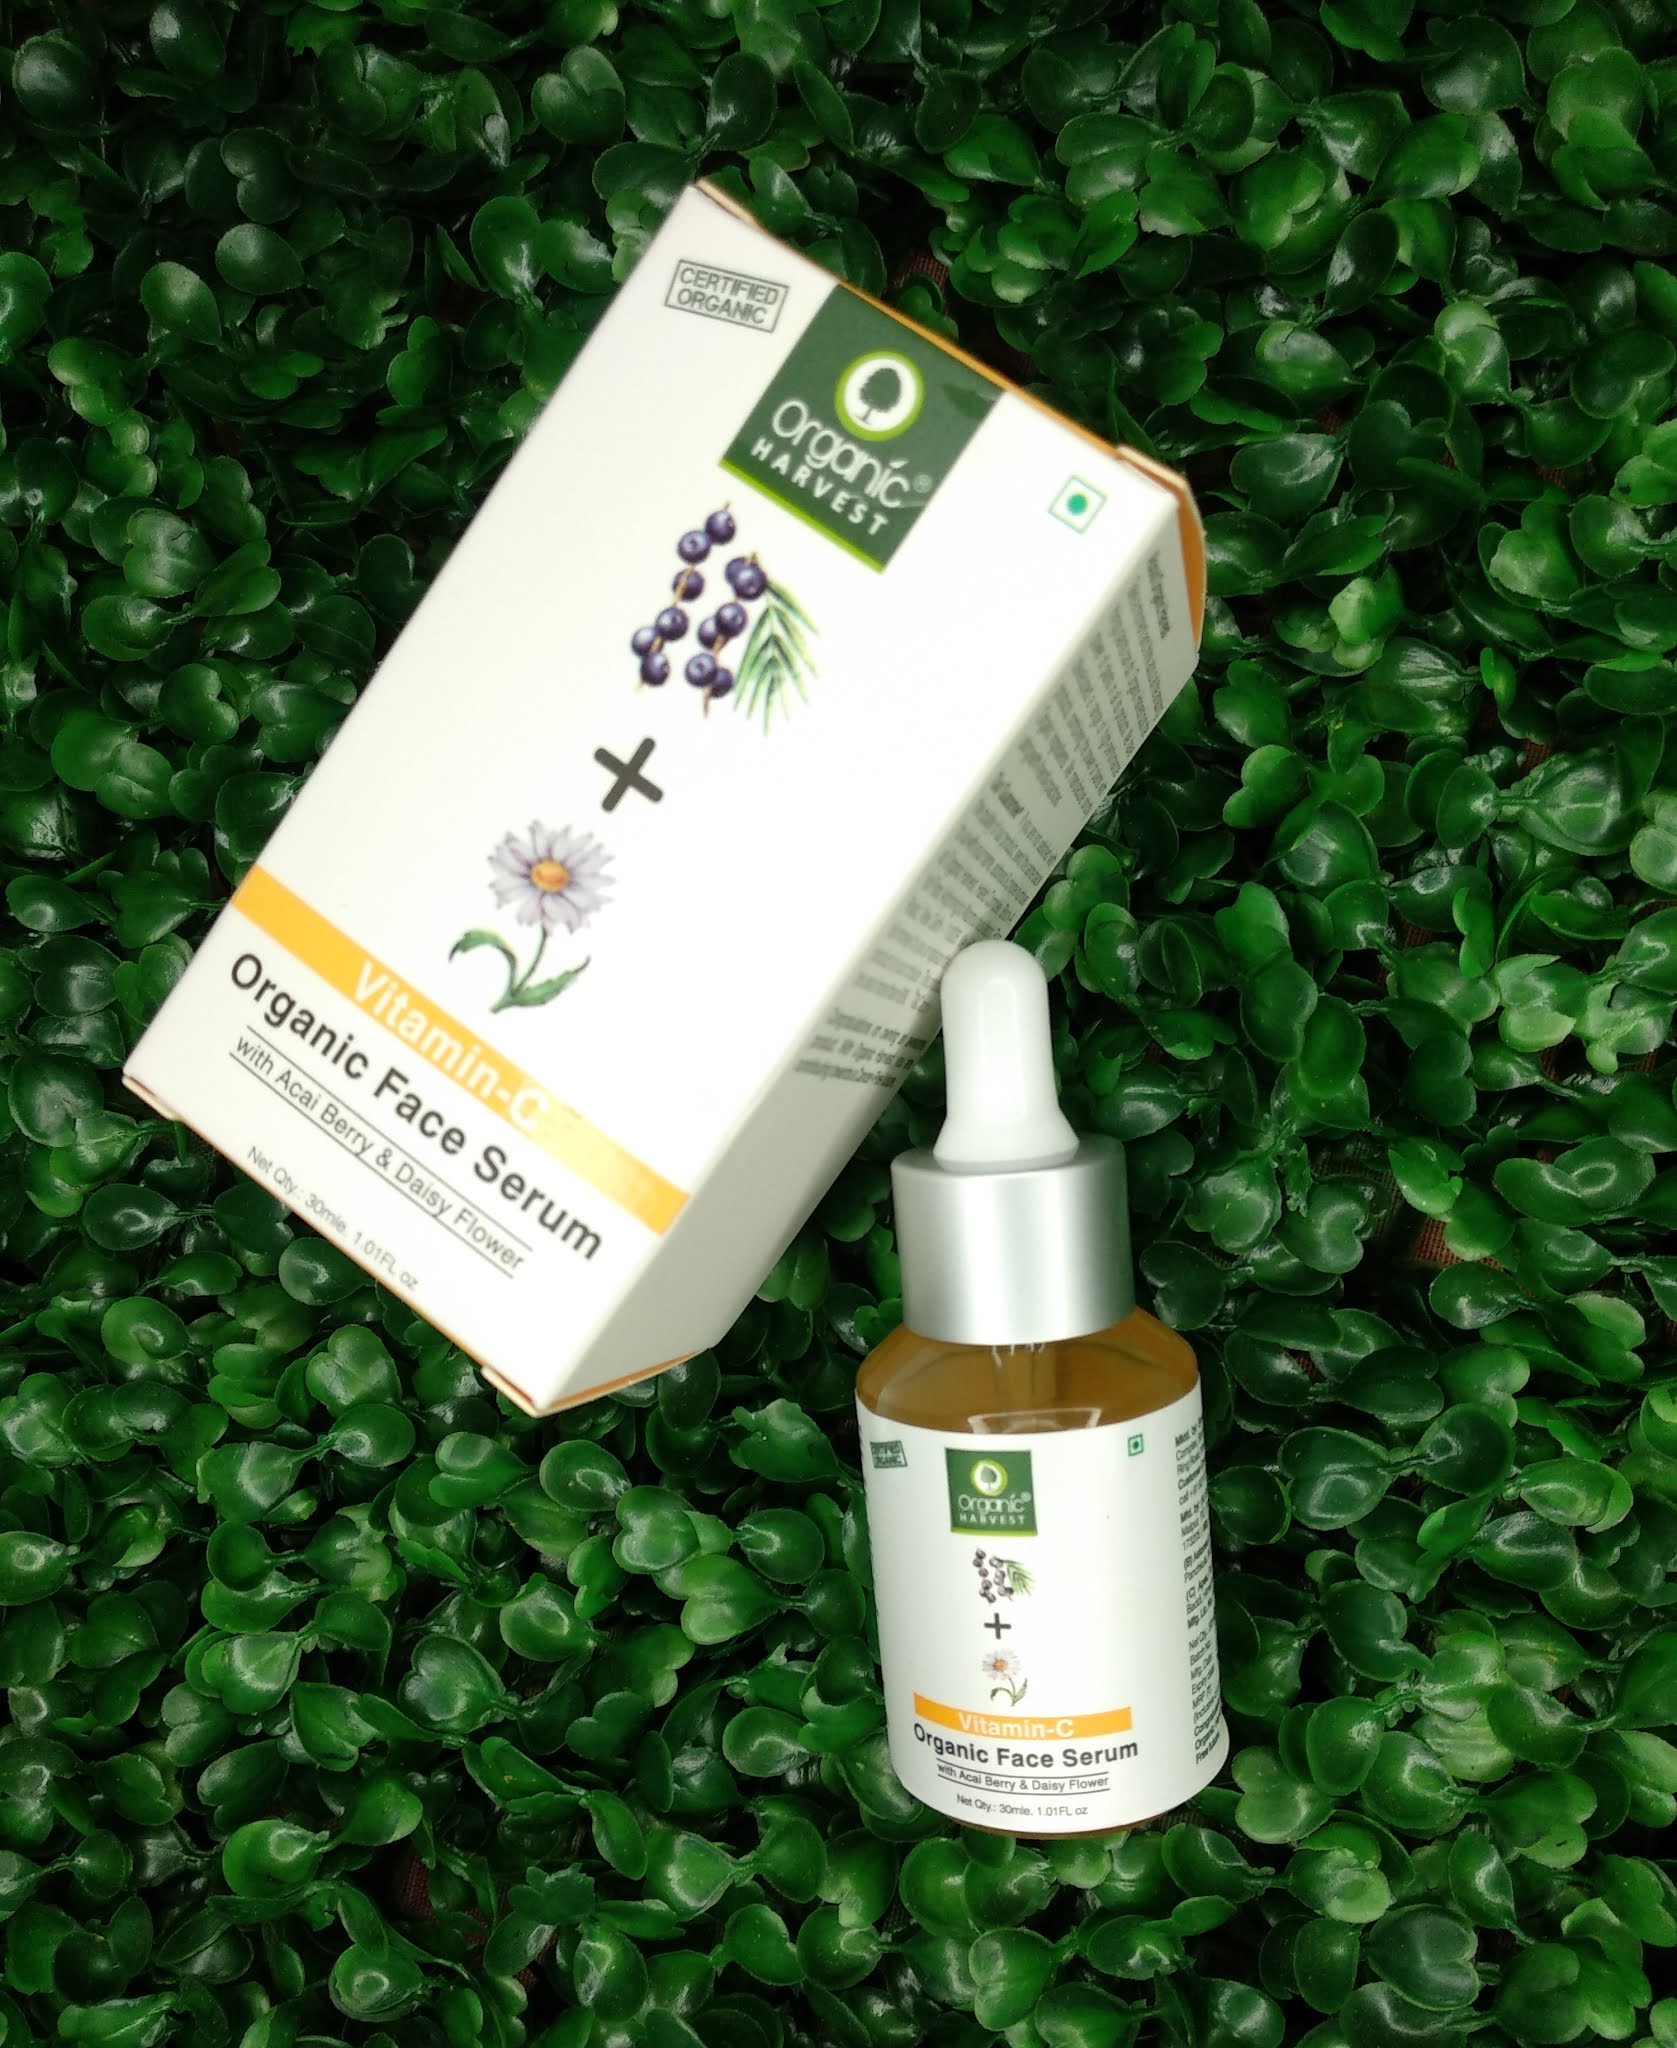 ORGANIC HARVEST Vitamin-C Organic Face Review - My favourite works